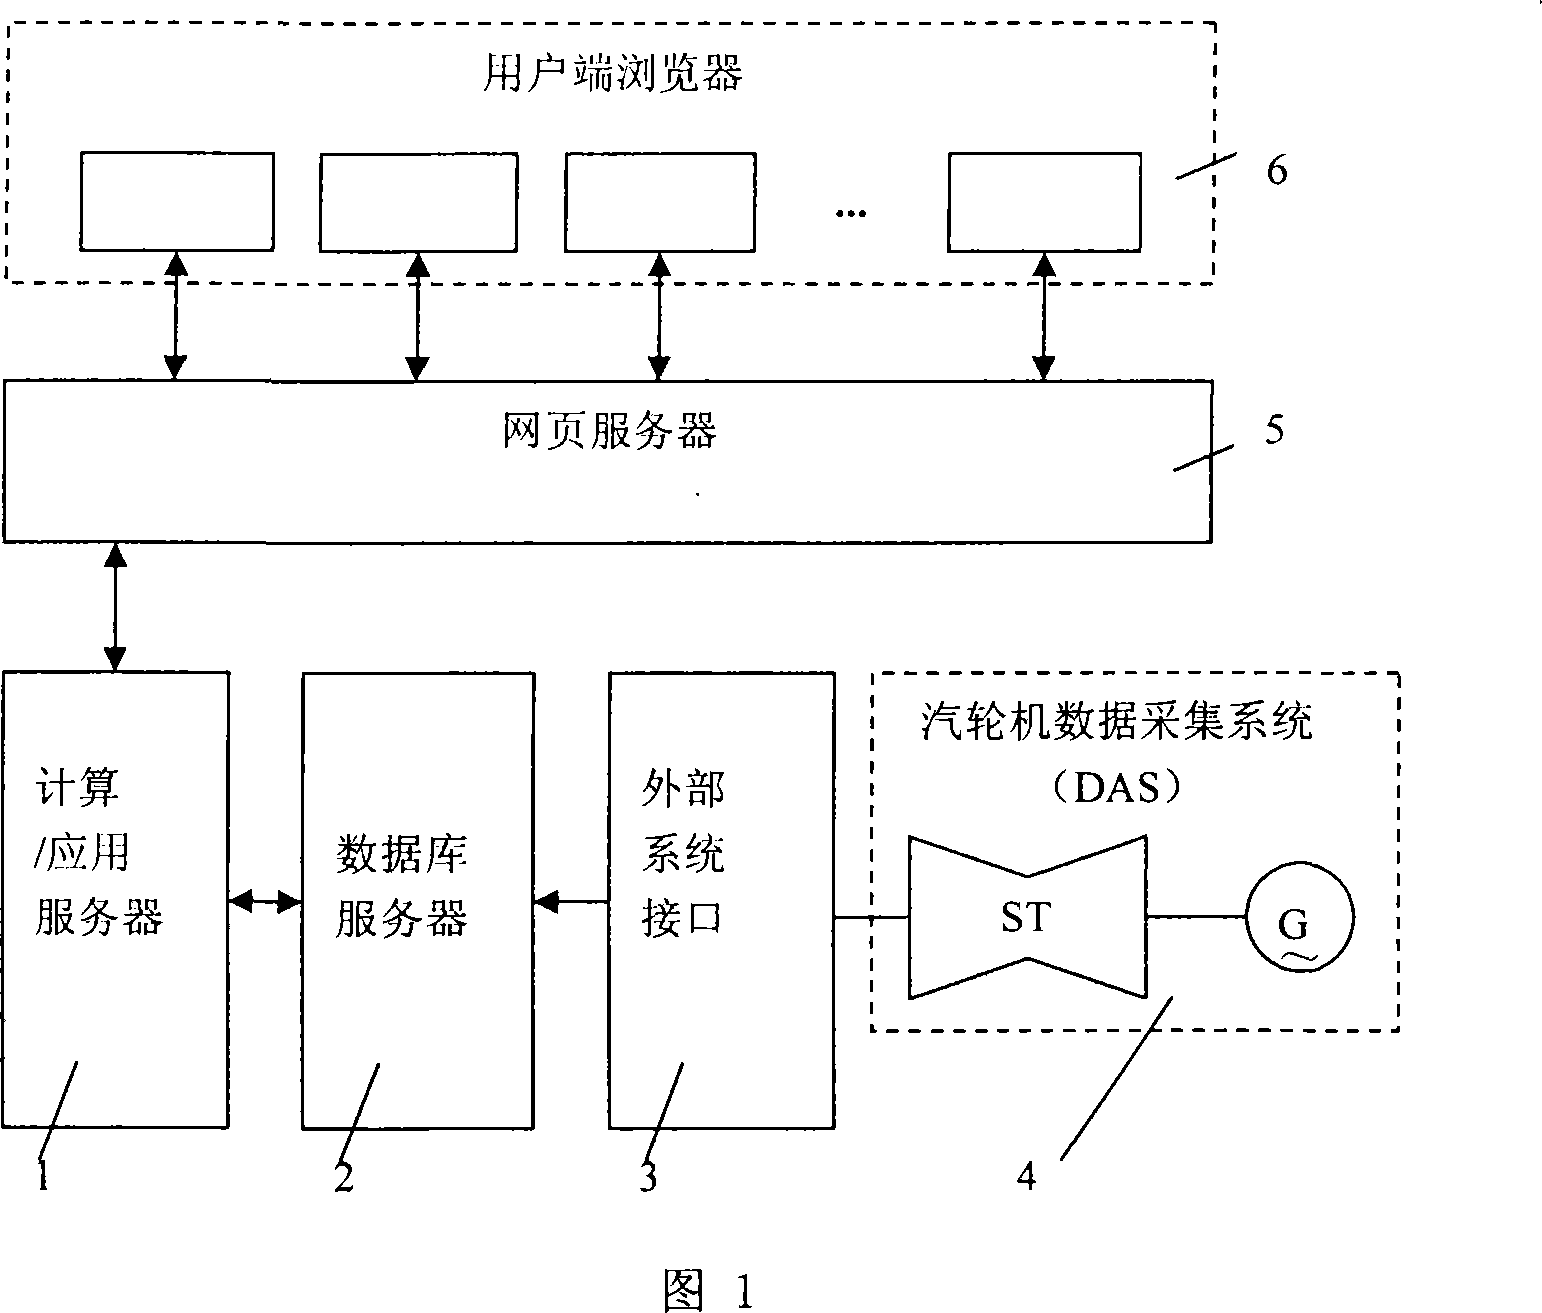 Single steam turbine key components and parts low-cycle fatigue service-life management system and management method